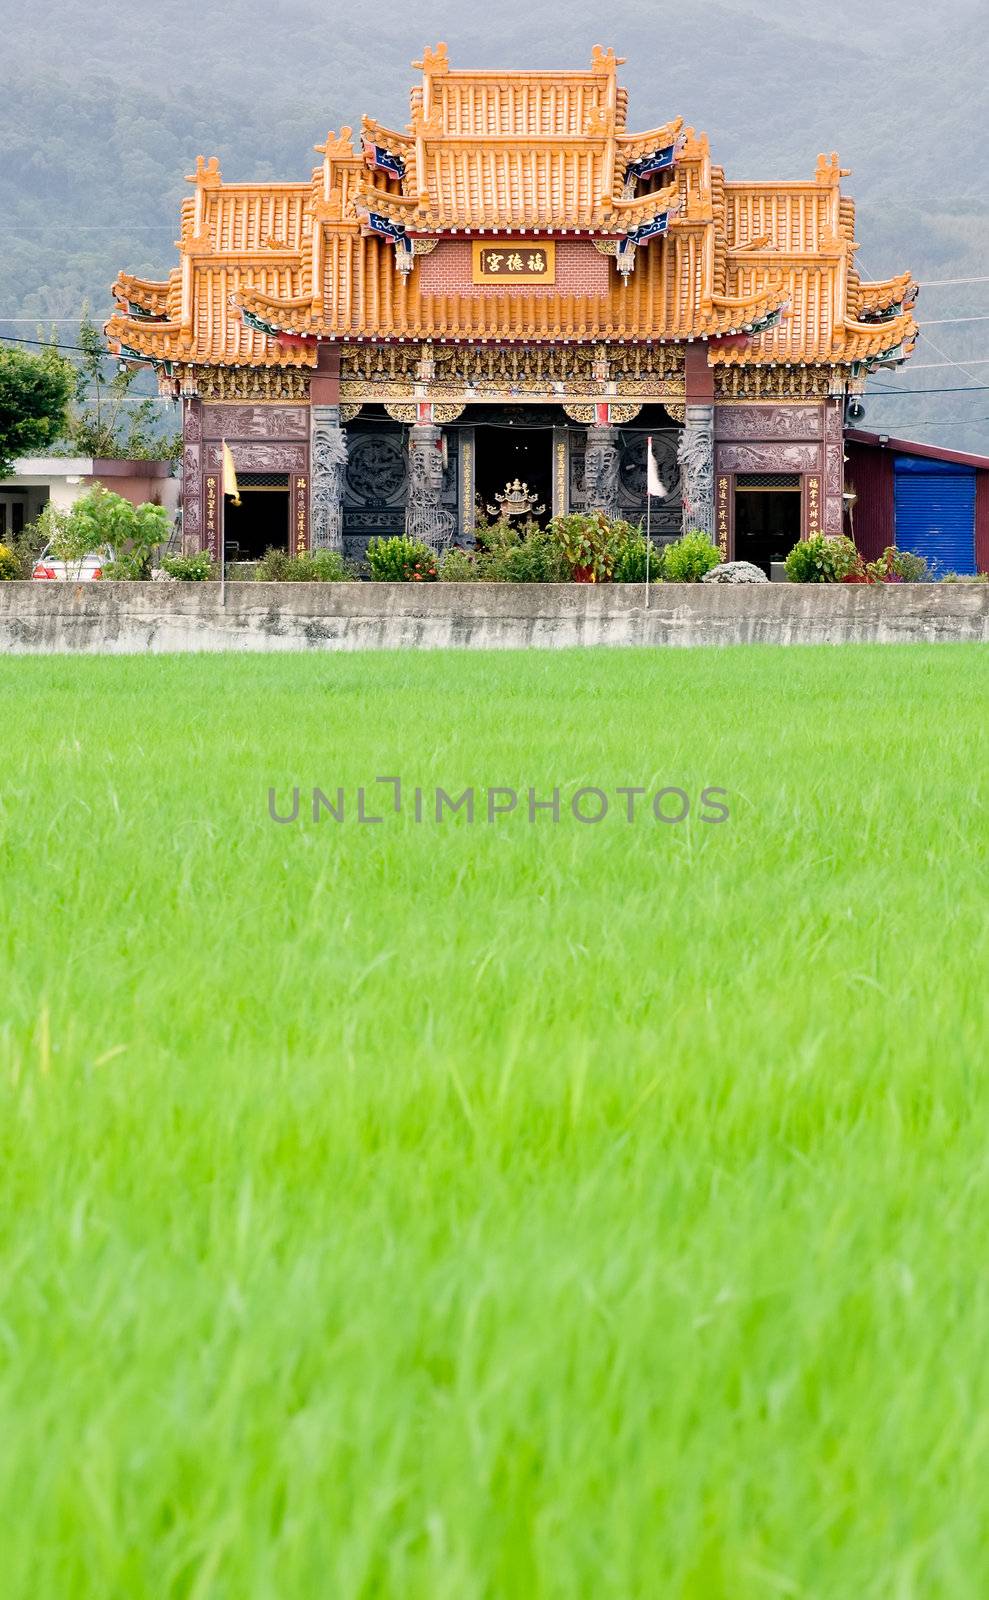 It is a Chinese temple on the farm.